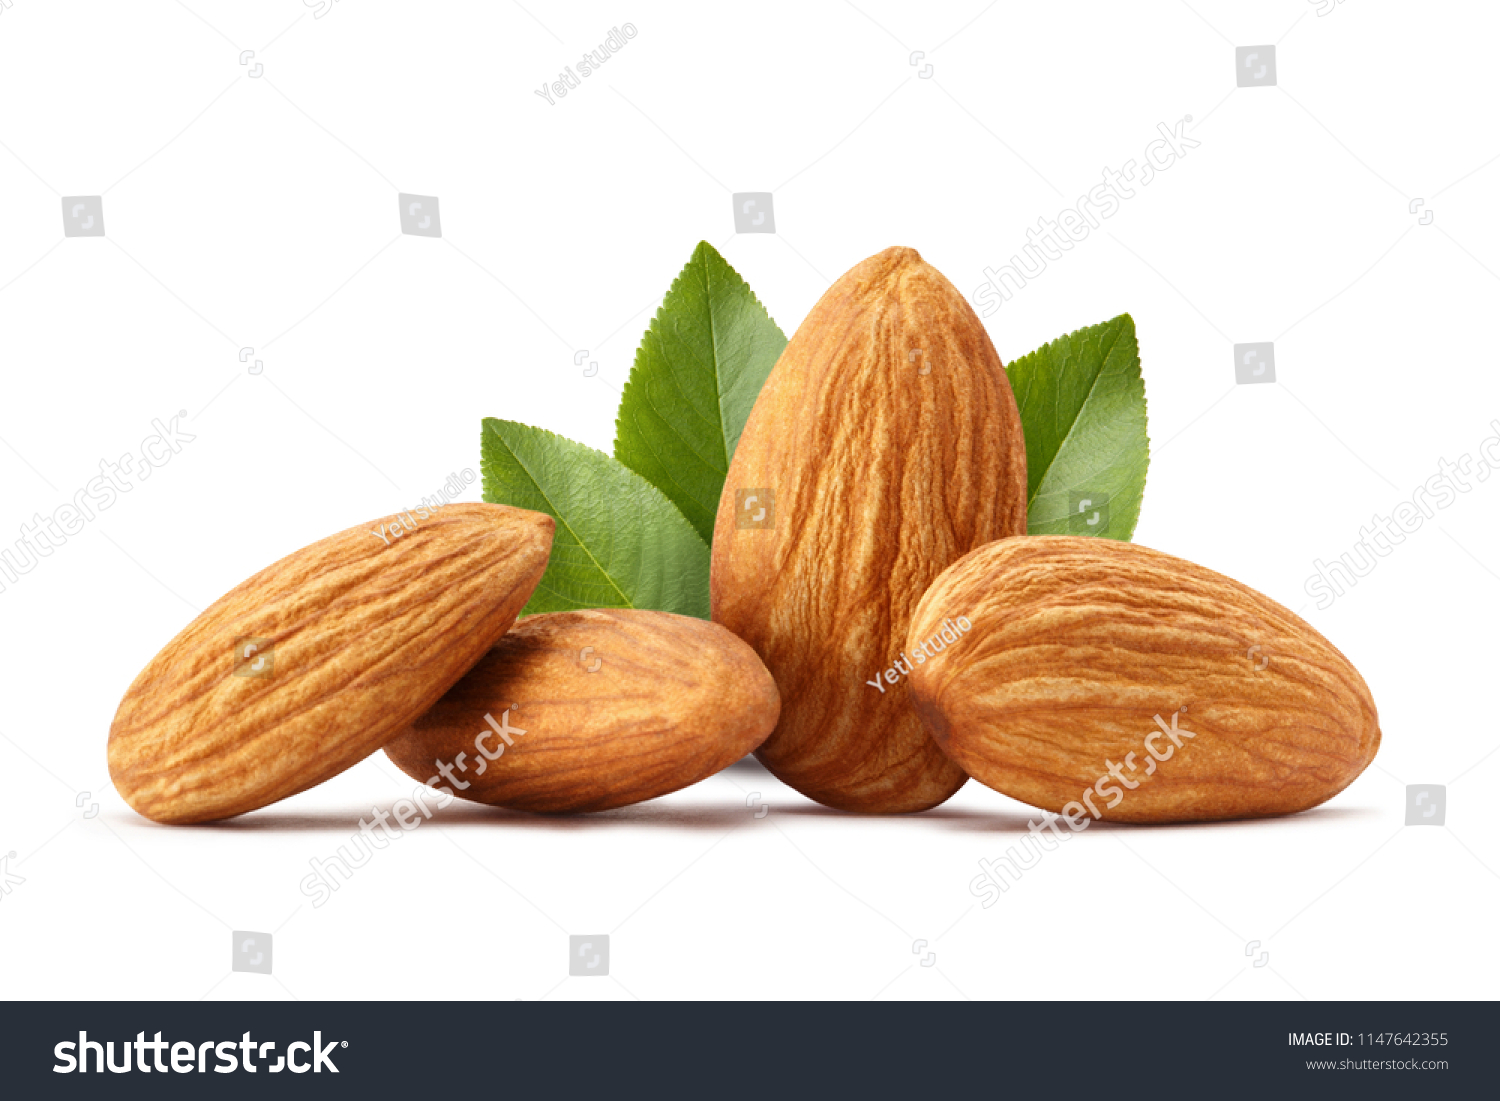 Close-up of almonds with leaves, isolated on white background #1147642355